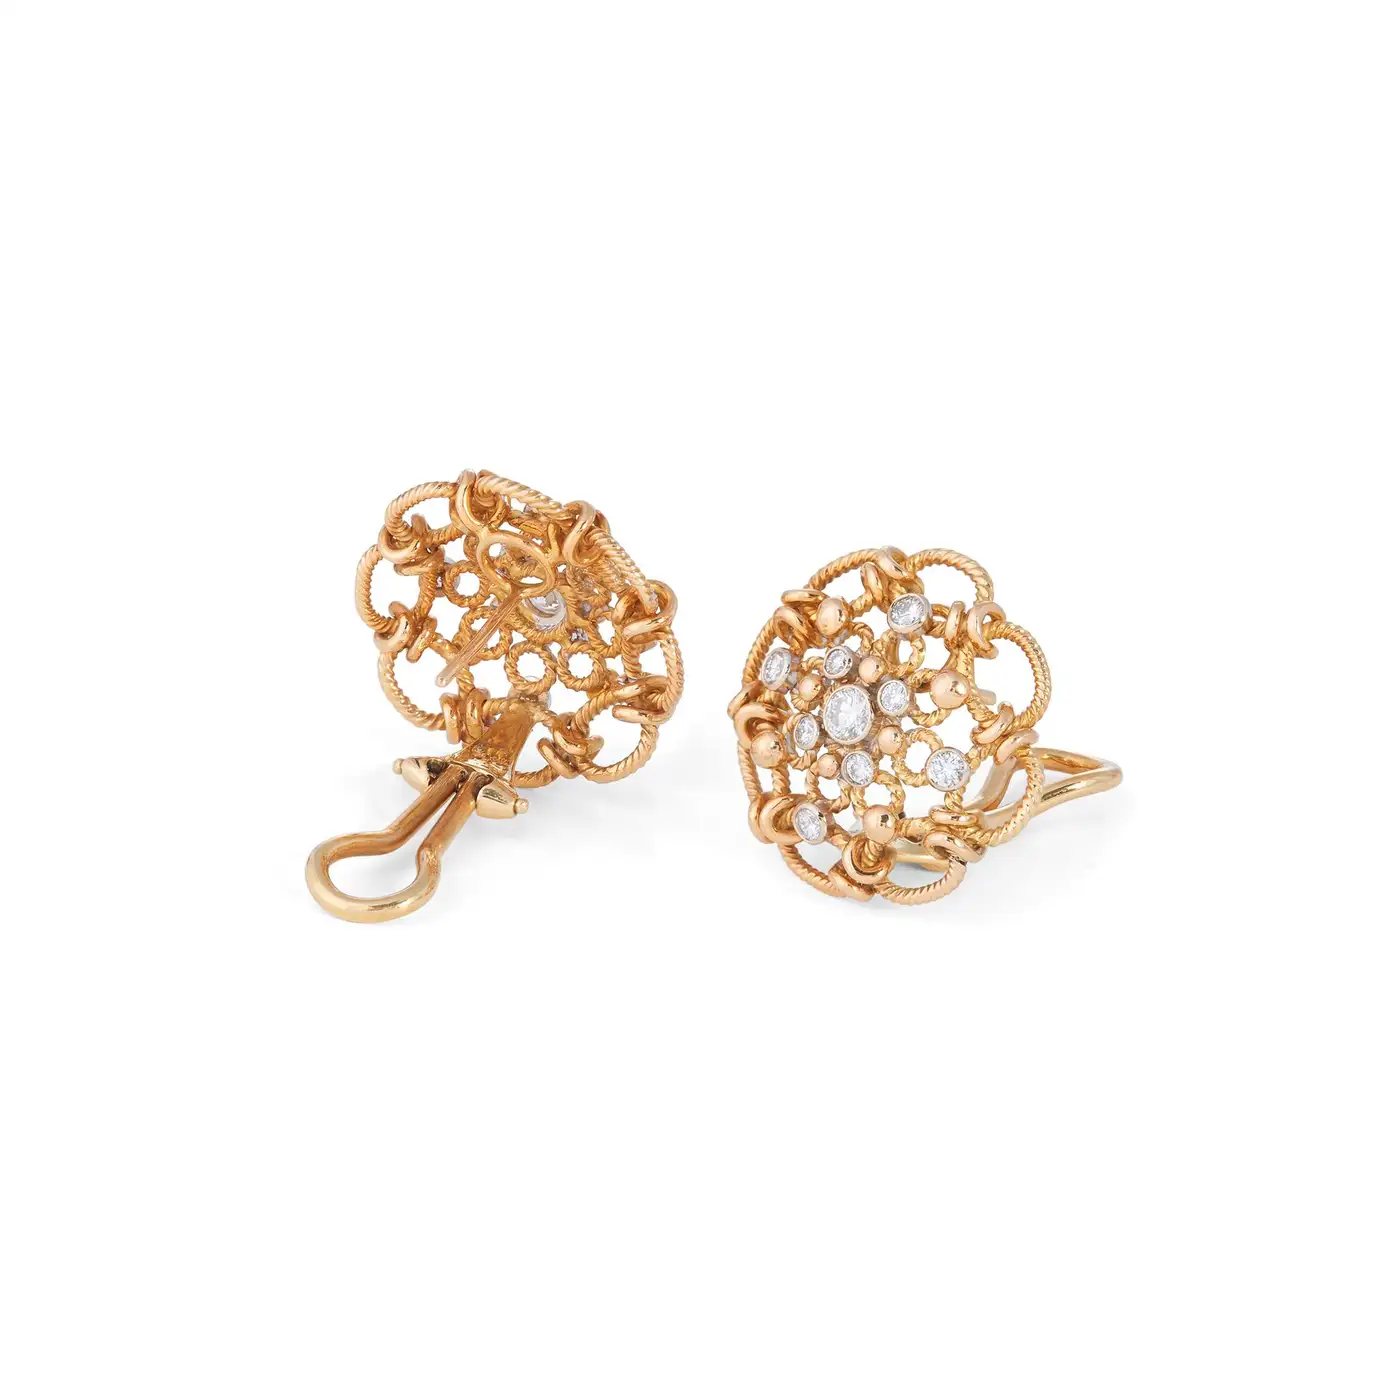 Vintage-Yellow-Gold-and-Diamond-Earrings-3.webp